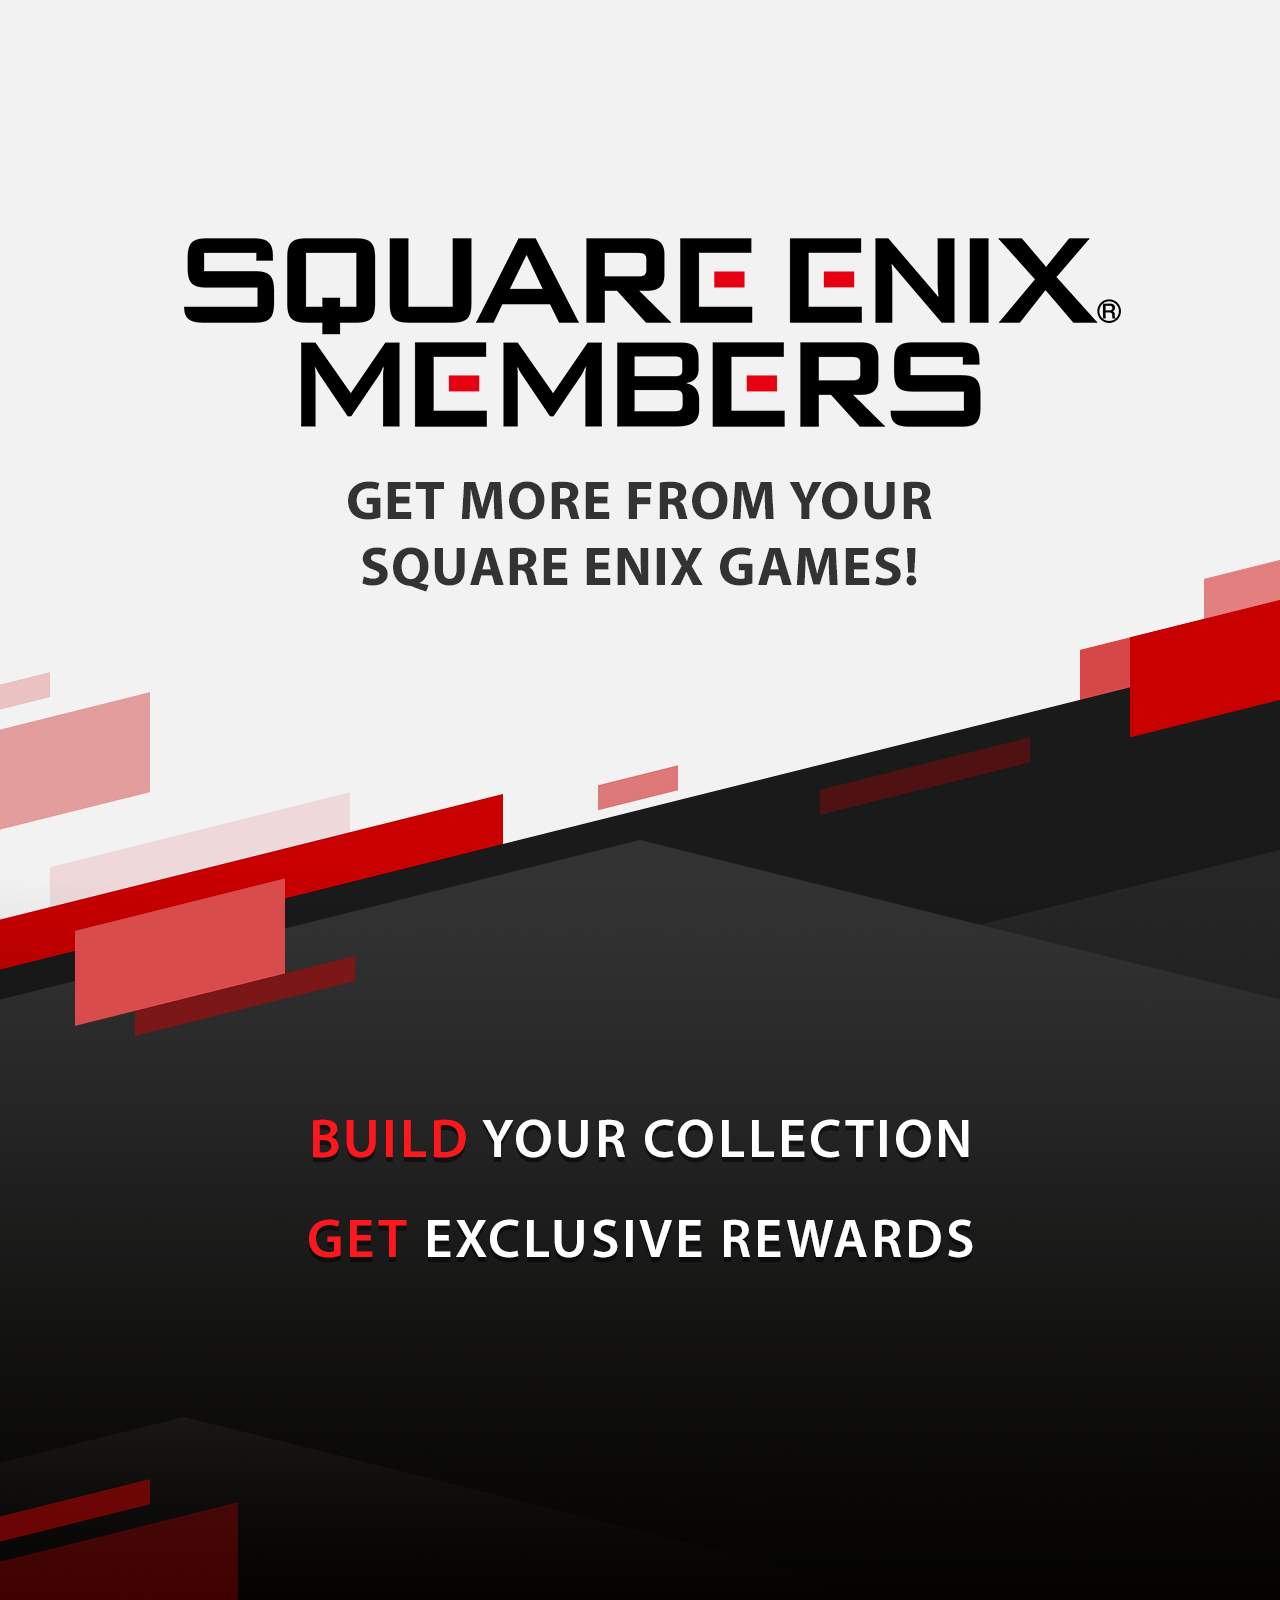 Square Enix Europe, London, Greater London, SE1 8NW